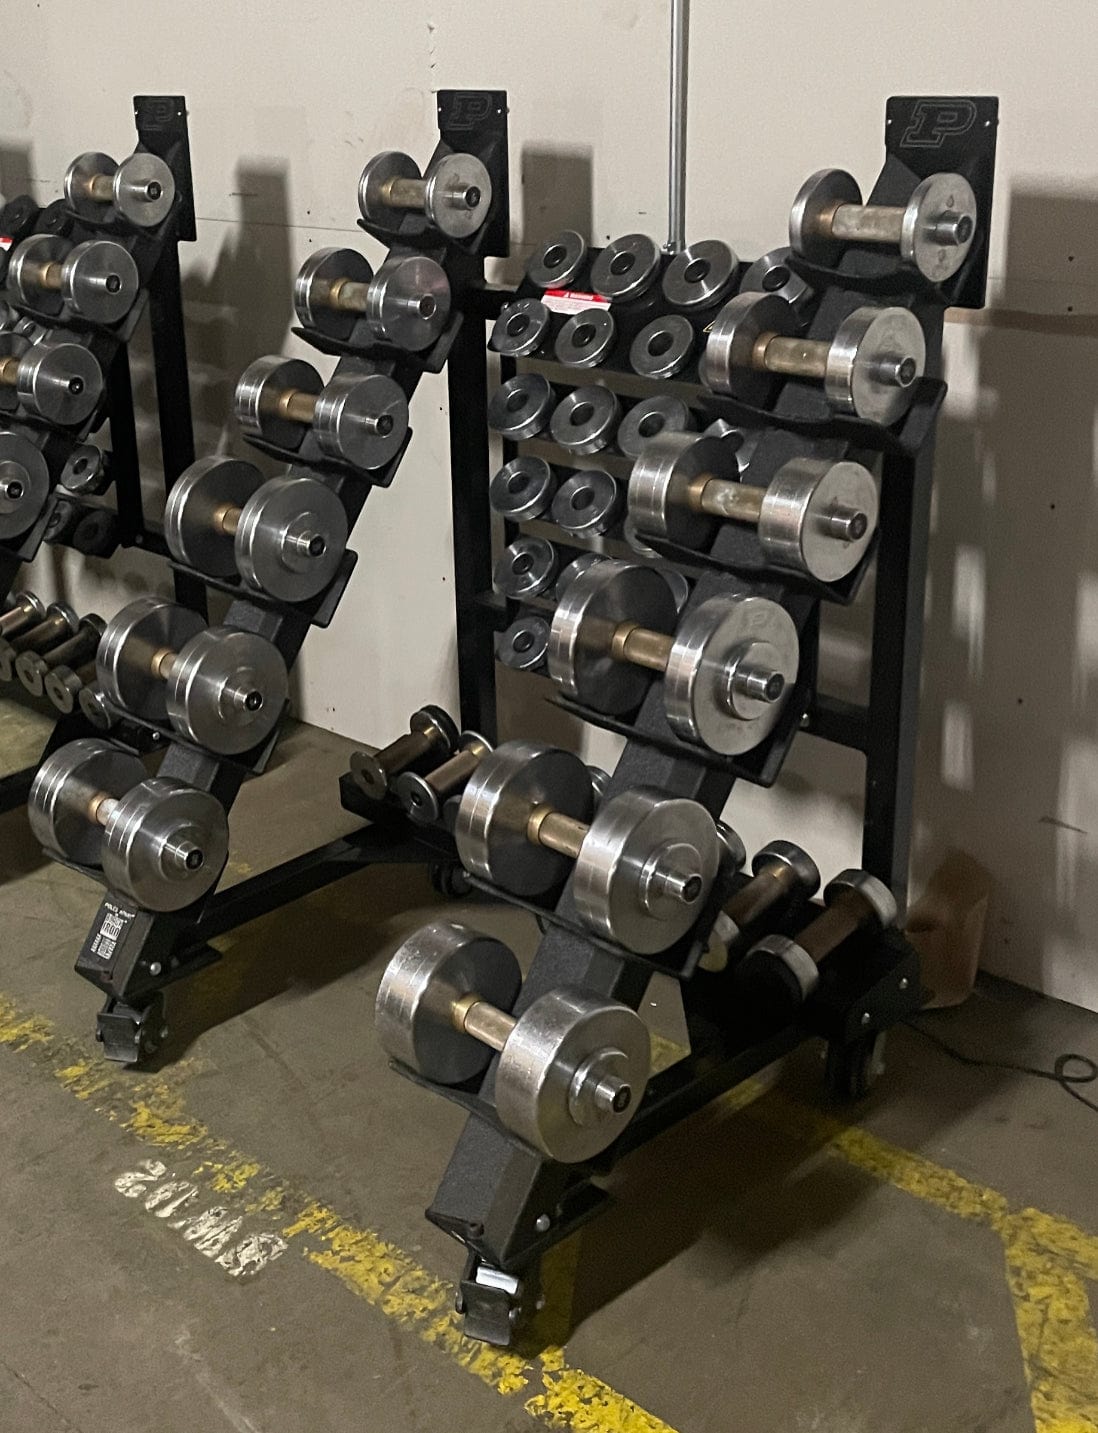 RTC Fitness Equipment 3164 - Sporting Goods > Exercise & Fitness > Weight Lifting > Free Weights Black Iron Strength® Adjustable Dumbbells Poles Apart® Wedge 40